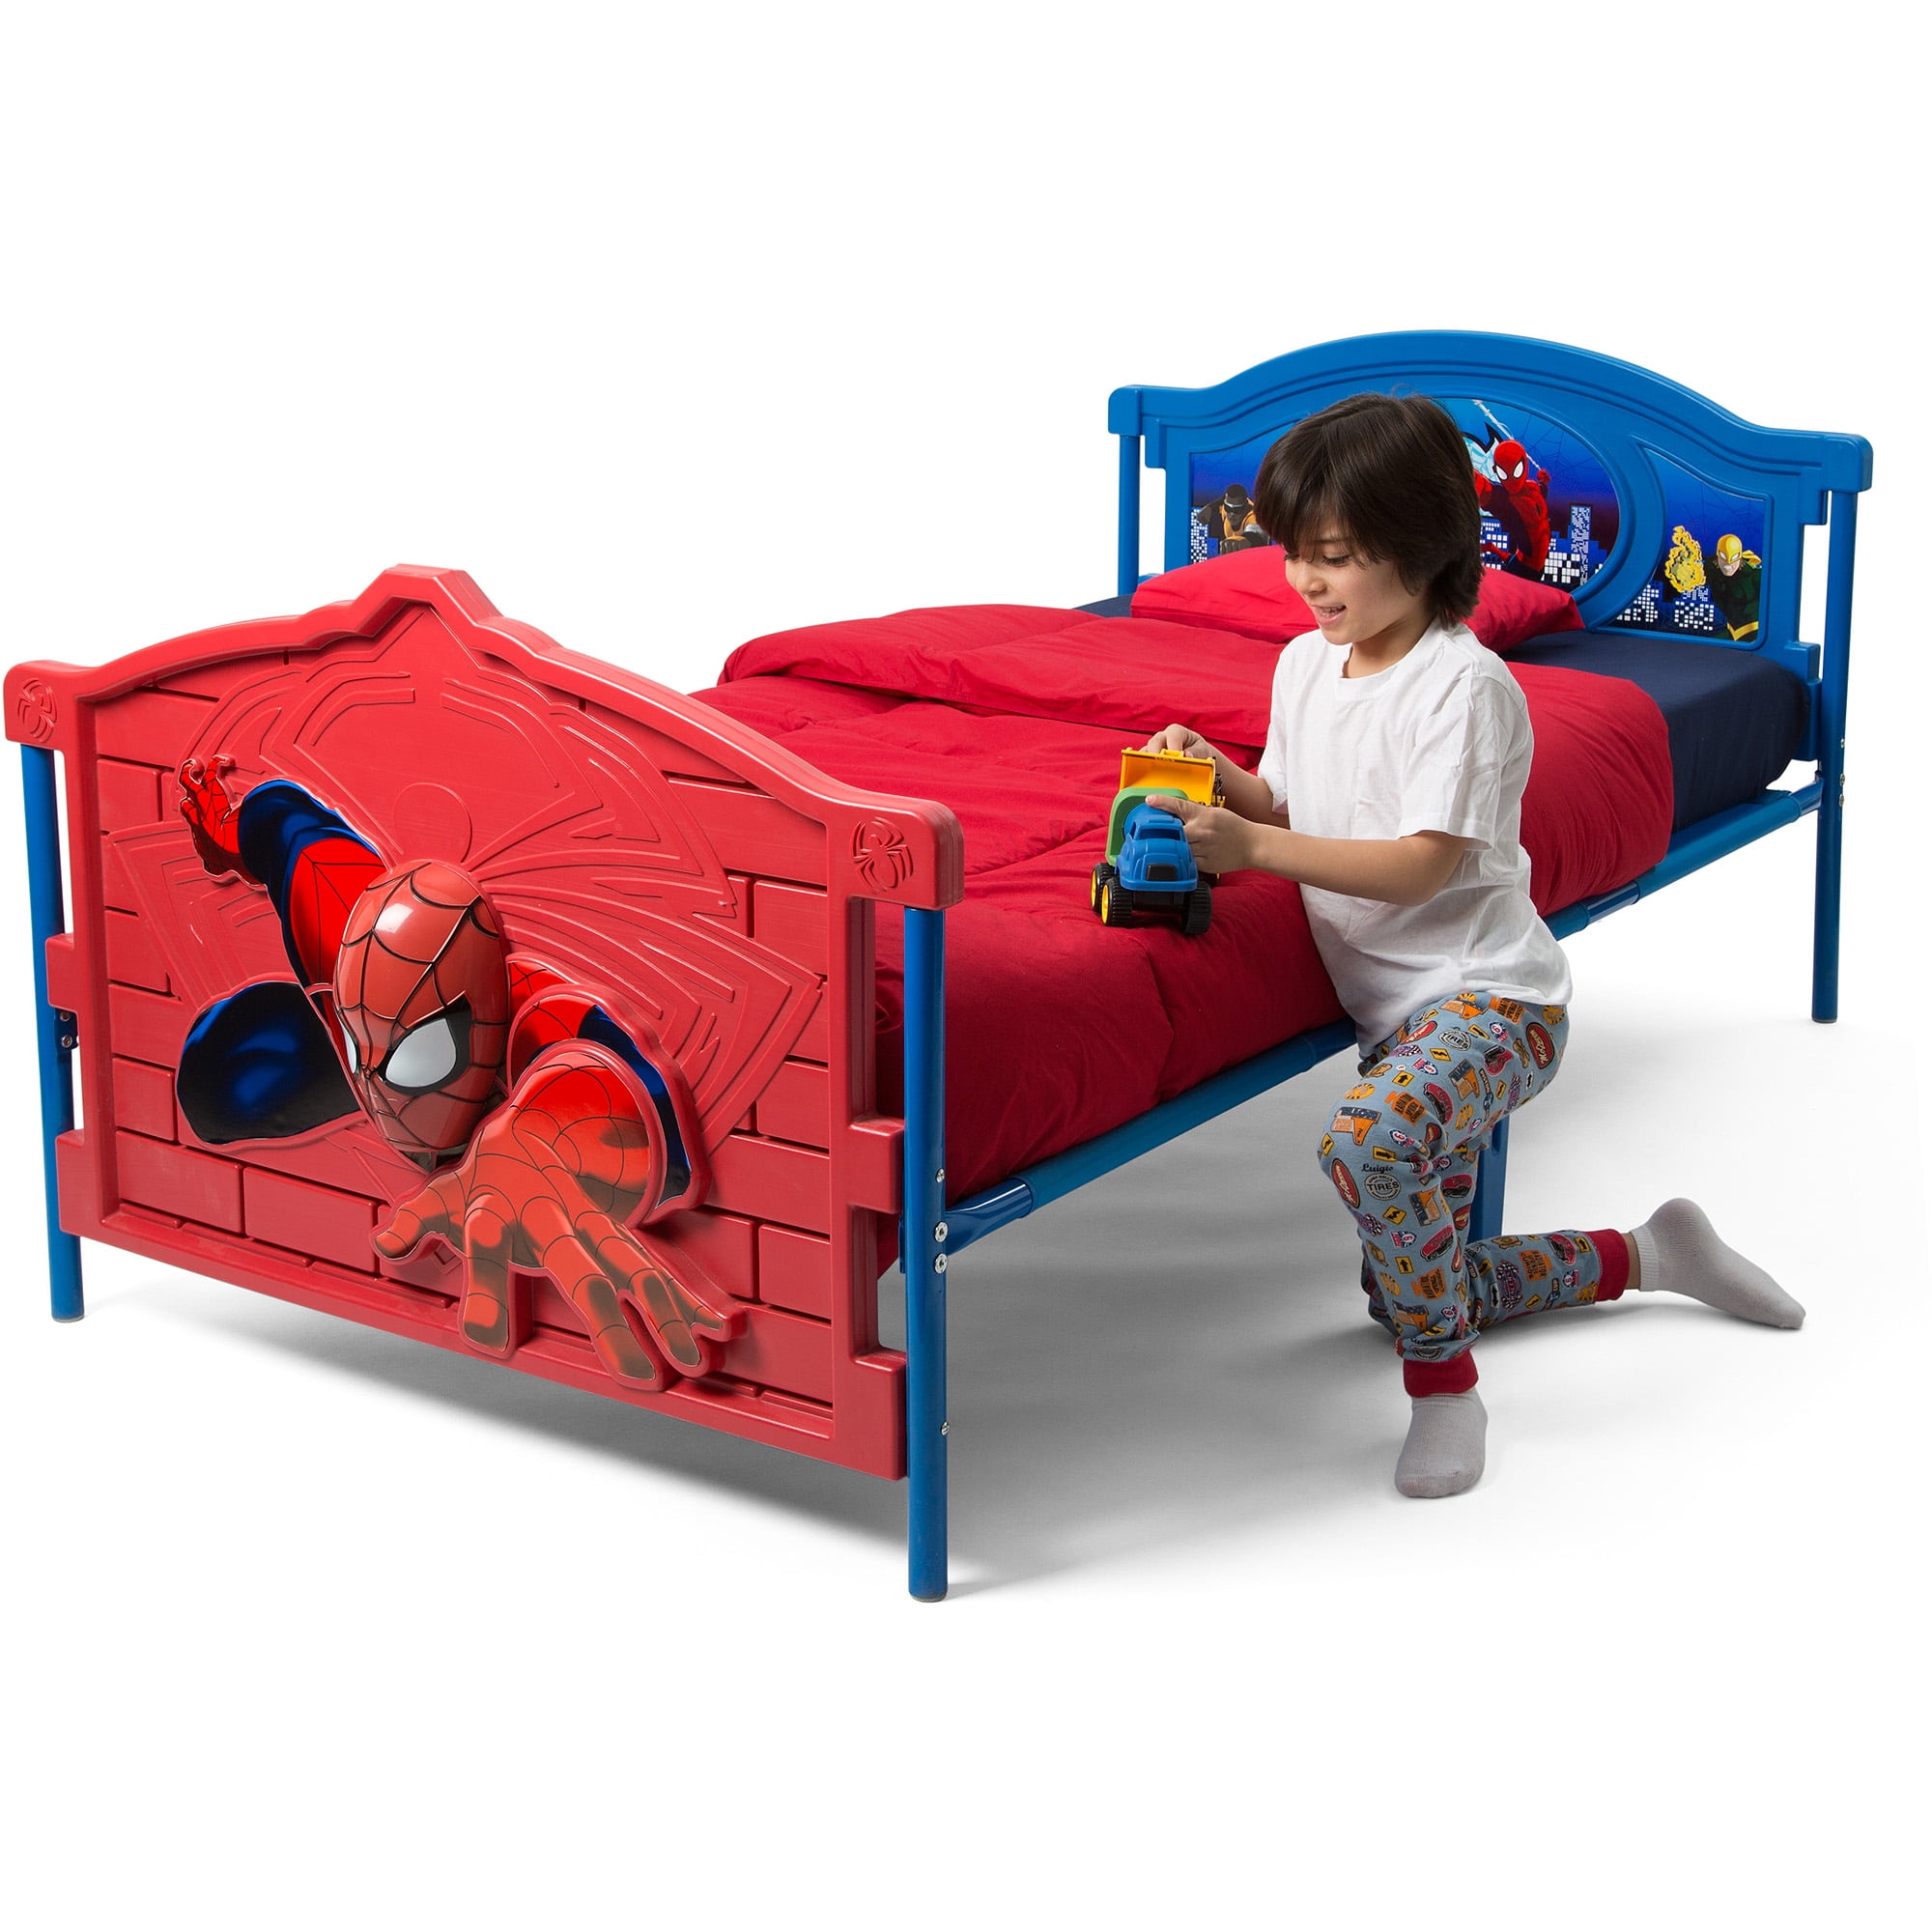 twin beds for little girls